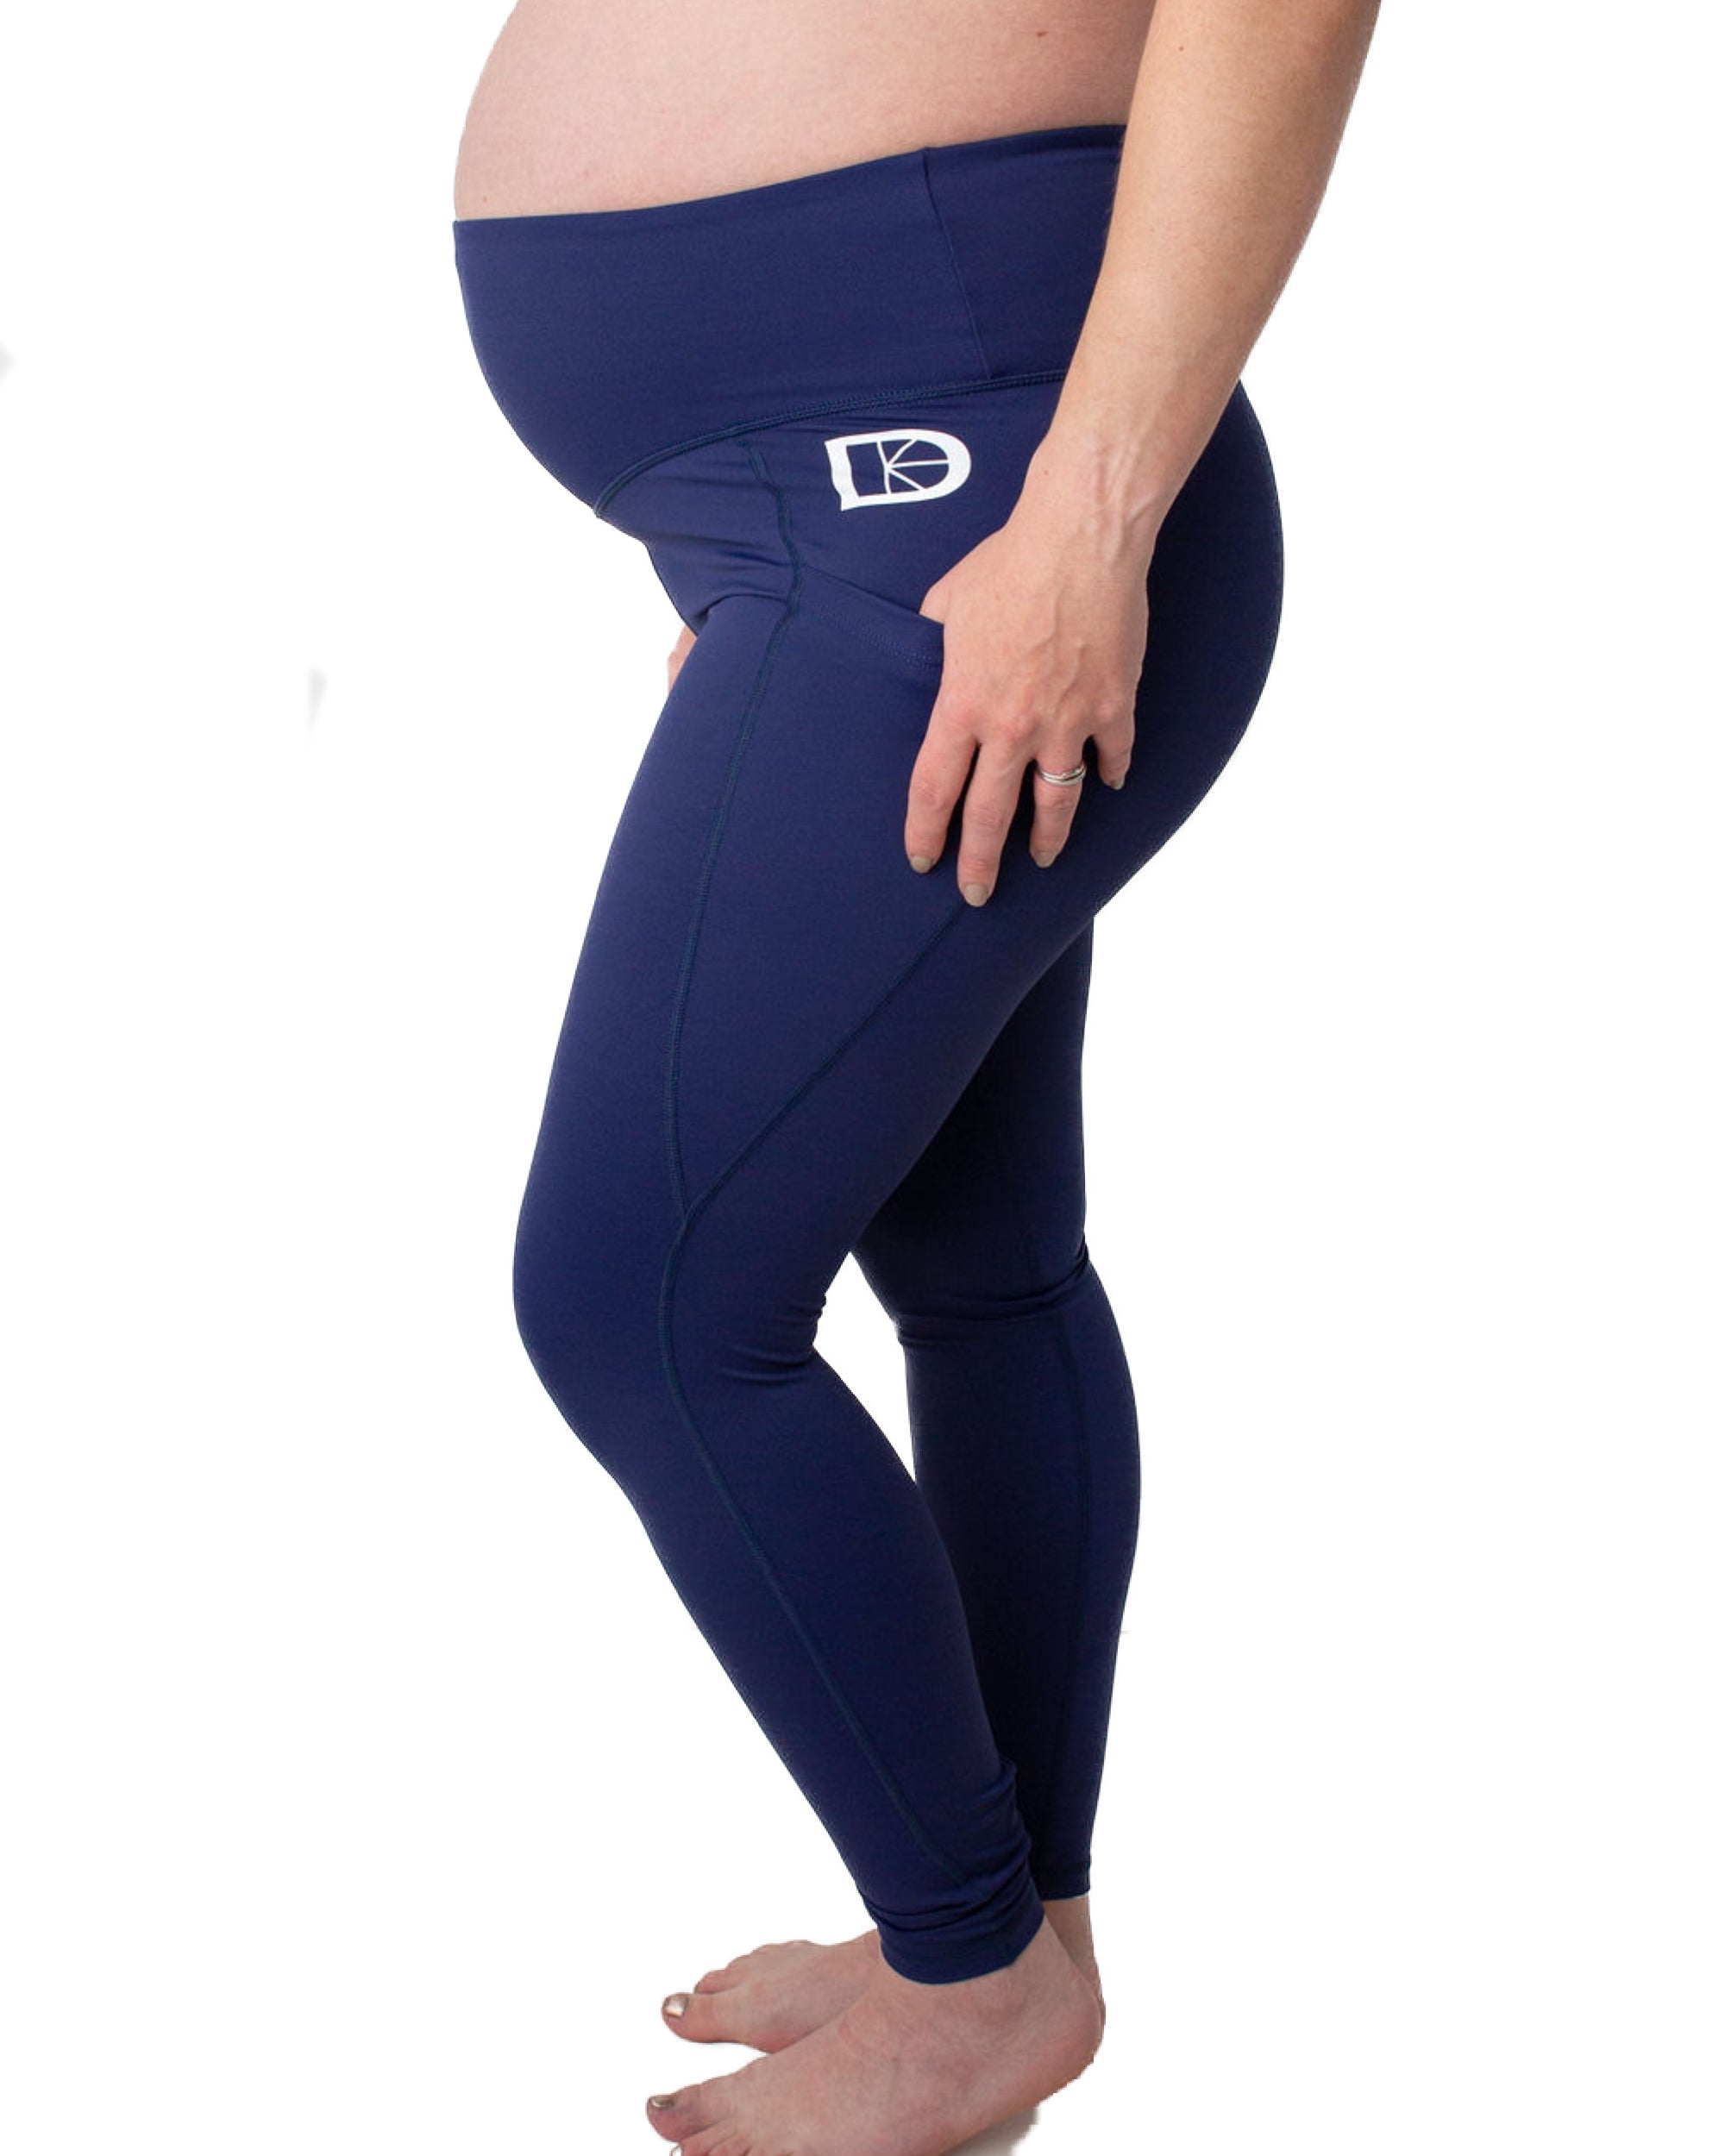 Women’s Activewear for Pregnancy, Breastfeeding & Beyond | Latched